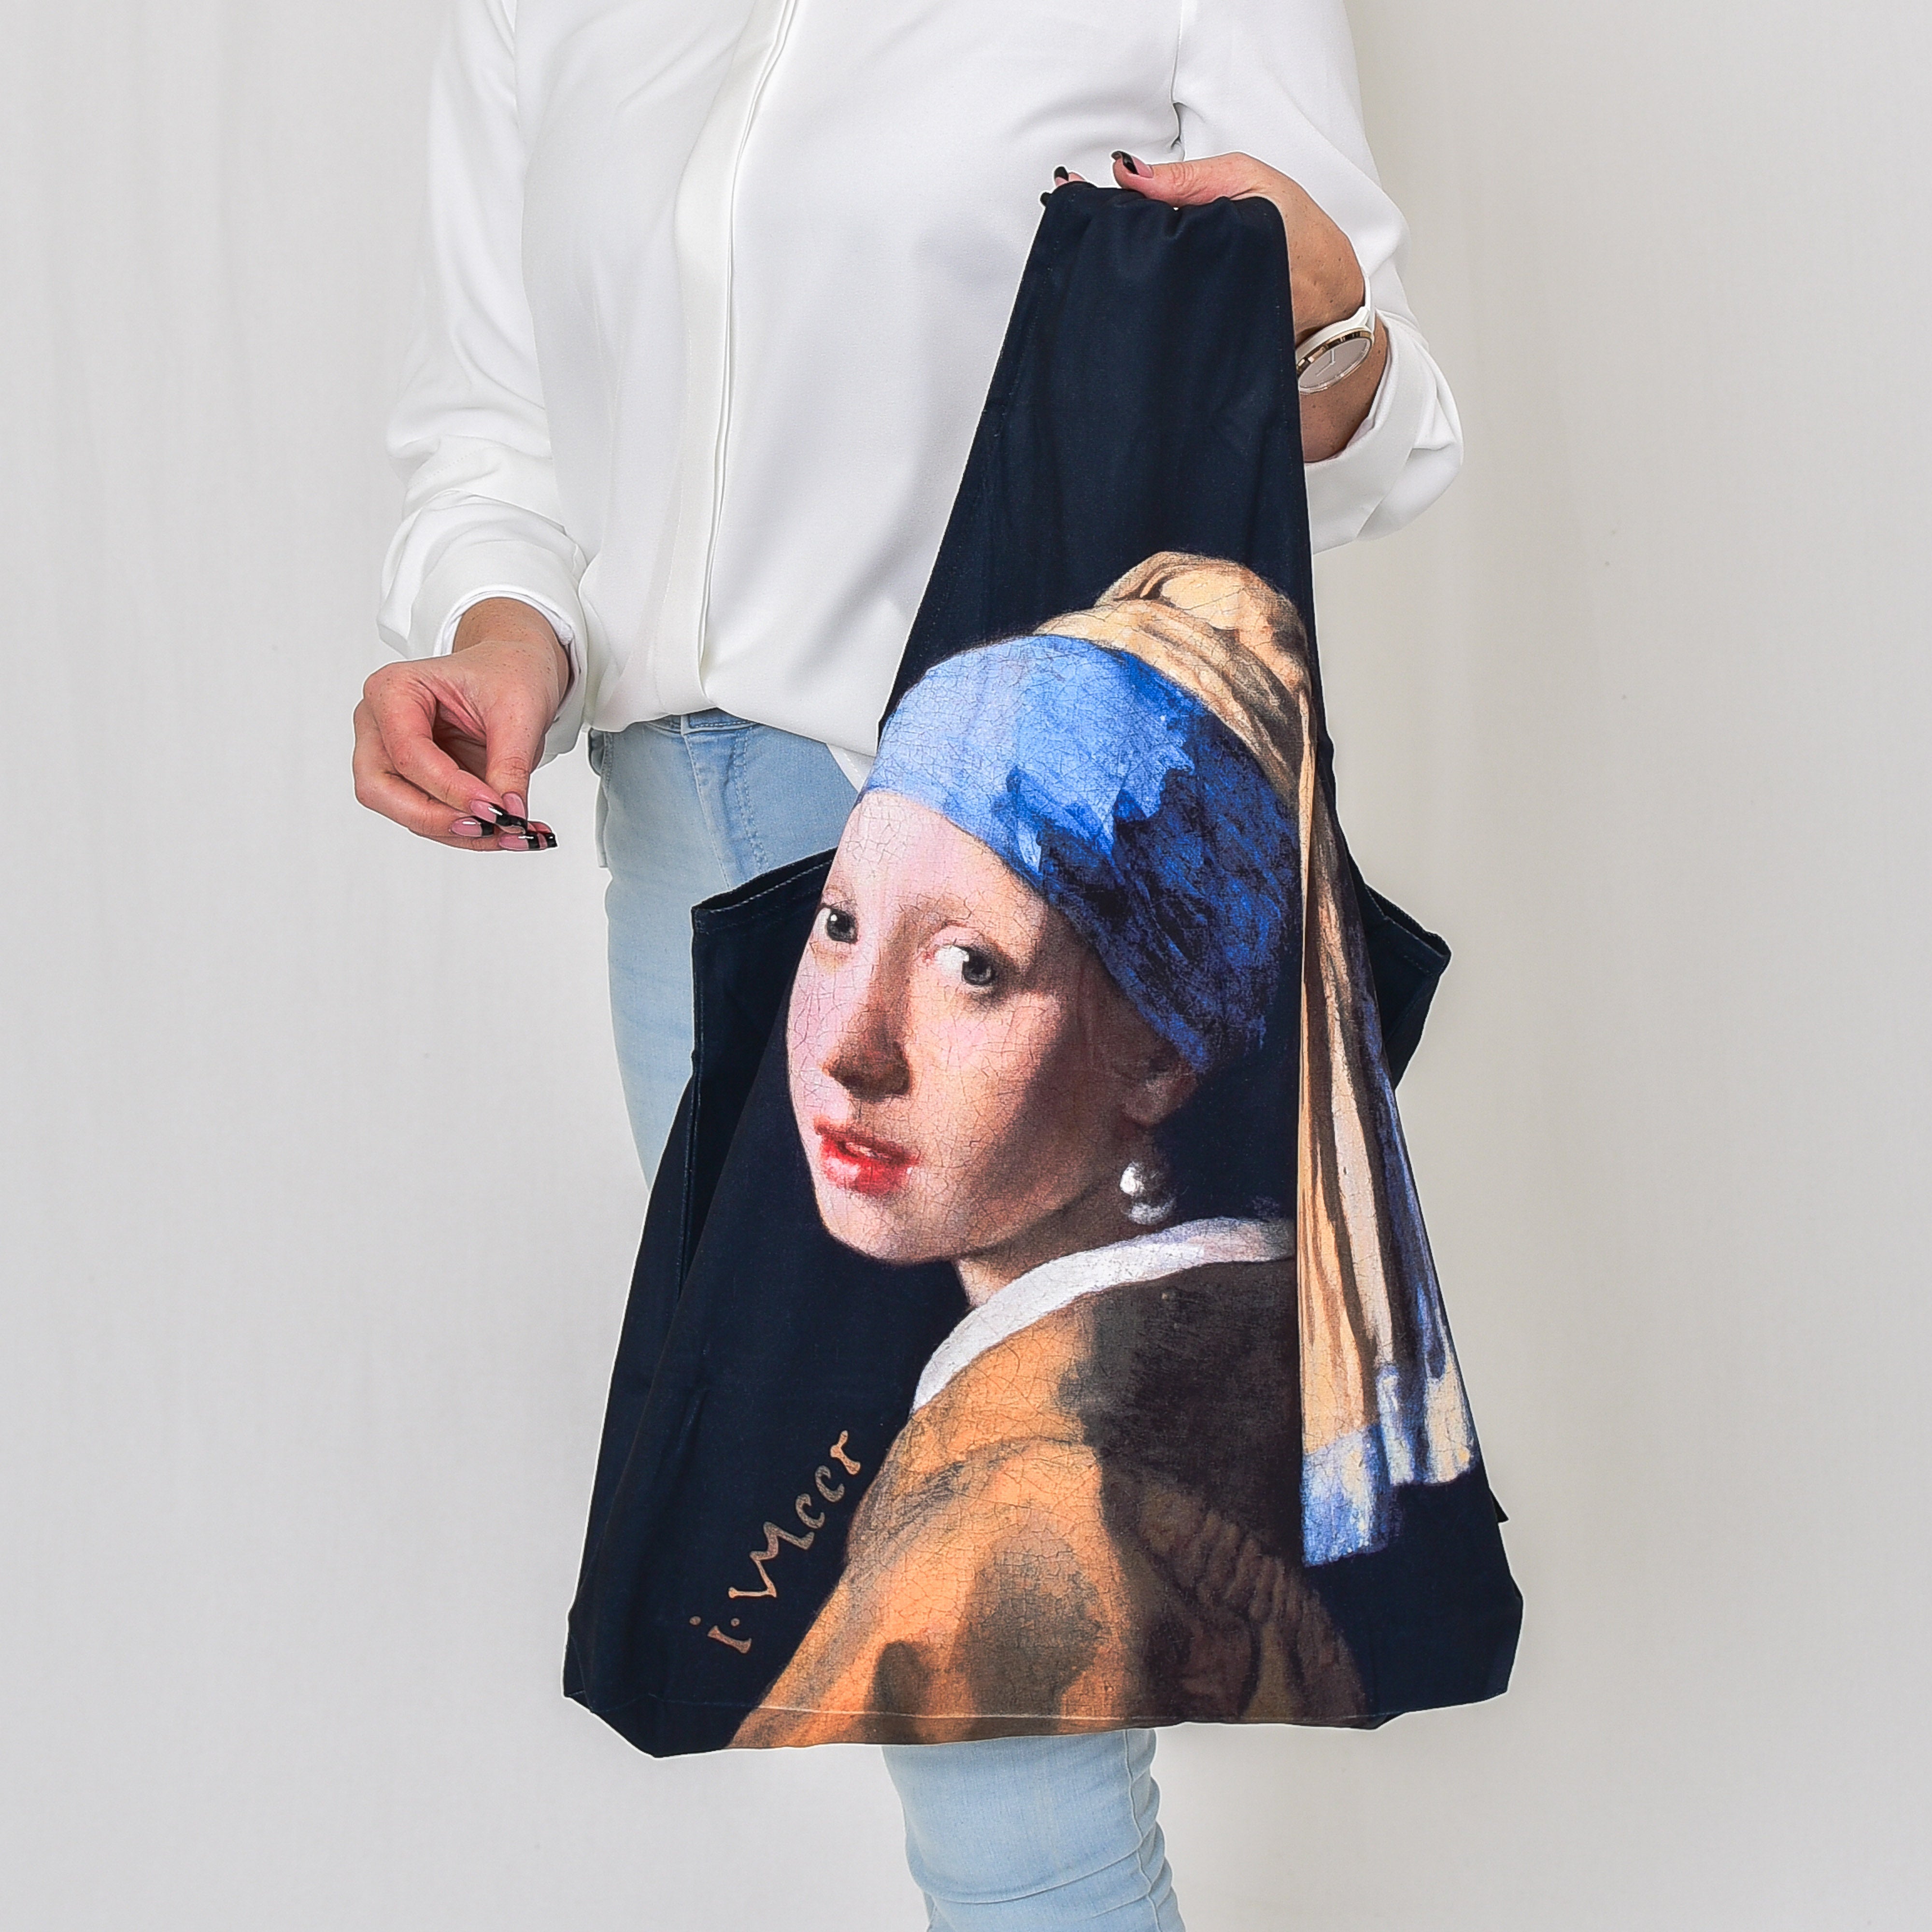 May Bag Johannes Vermeer "Girl with a Pearl Earring"